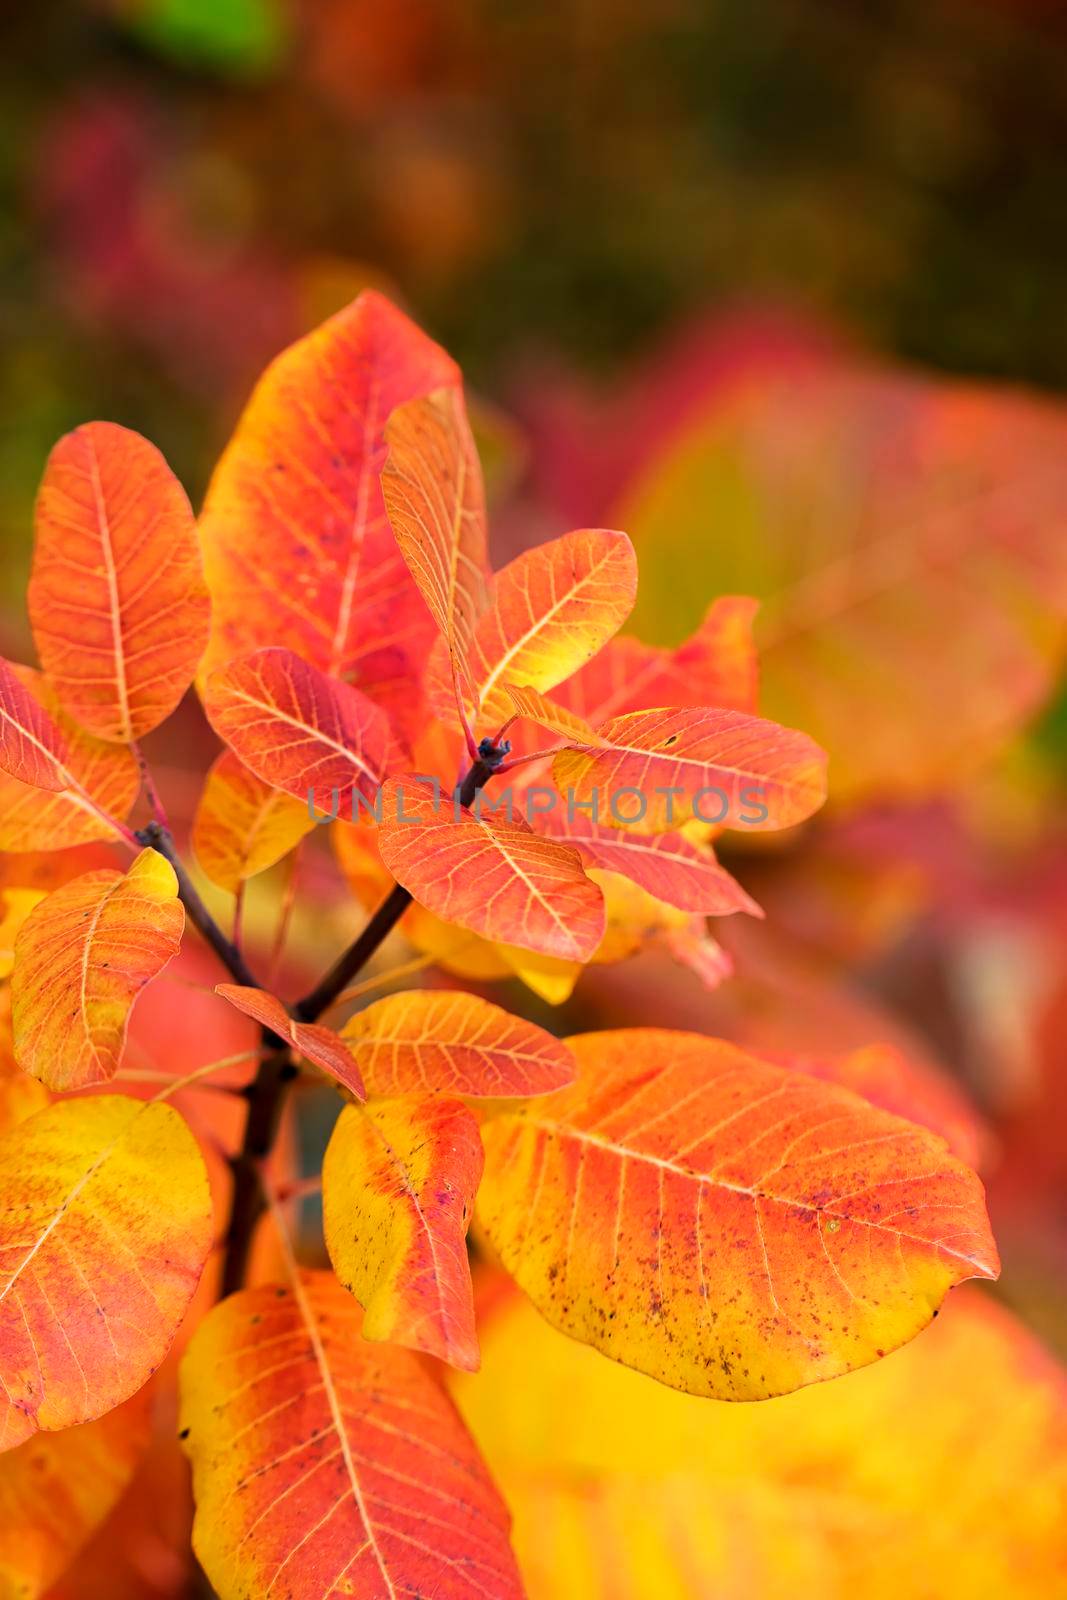 The beauty of autumn colors. Amazing colorful leaves.